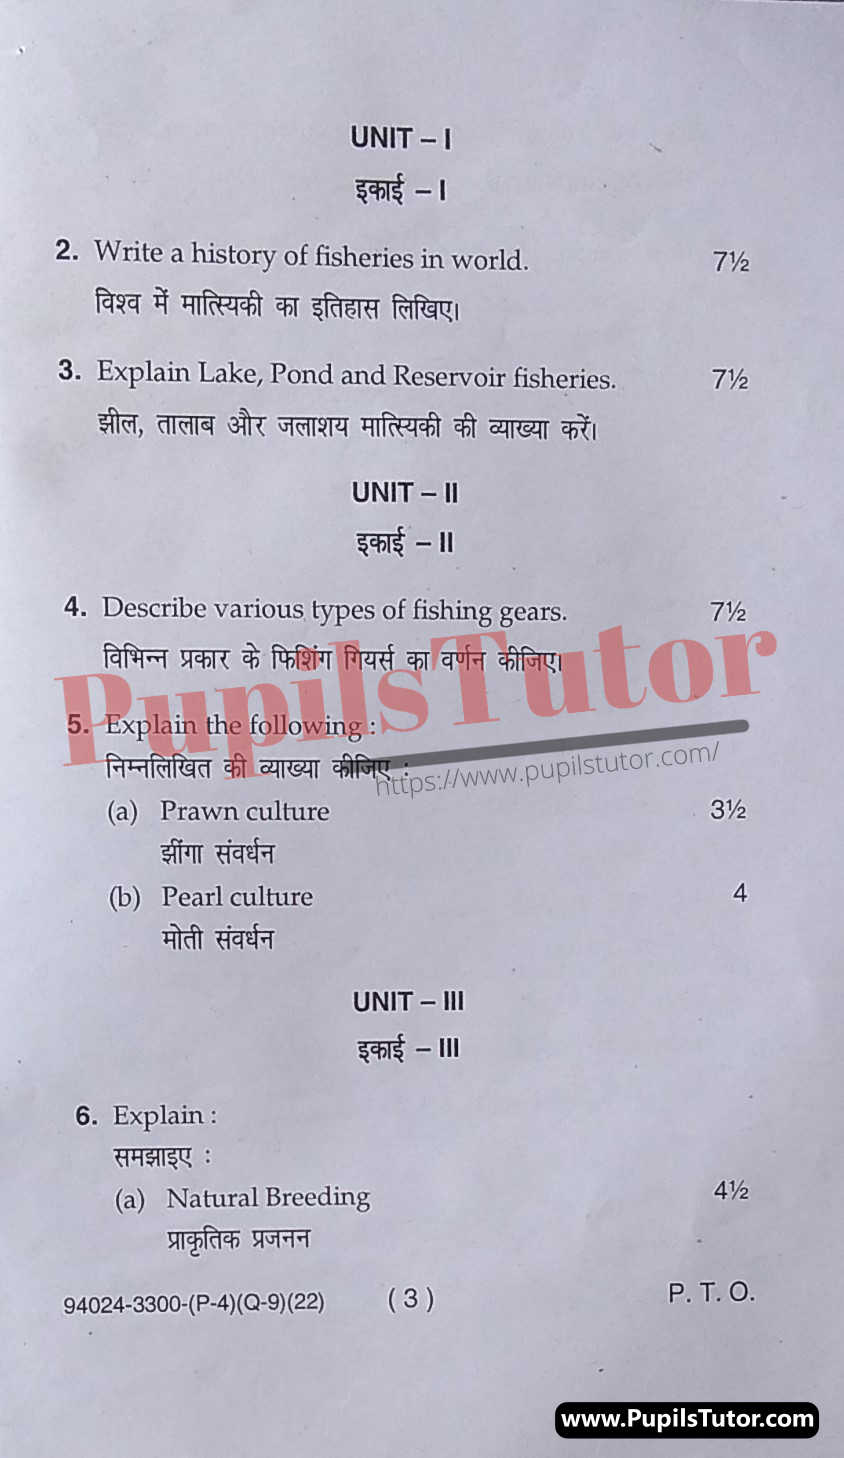 Free Download PDF Of M.D. University B.Sc. [Zoology] 5th Semester Latest Question Paper For Fish And Fisheries Subject (Page 3) - https://www.pupilstutor.com